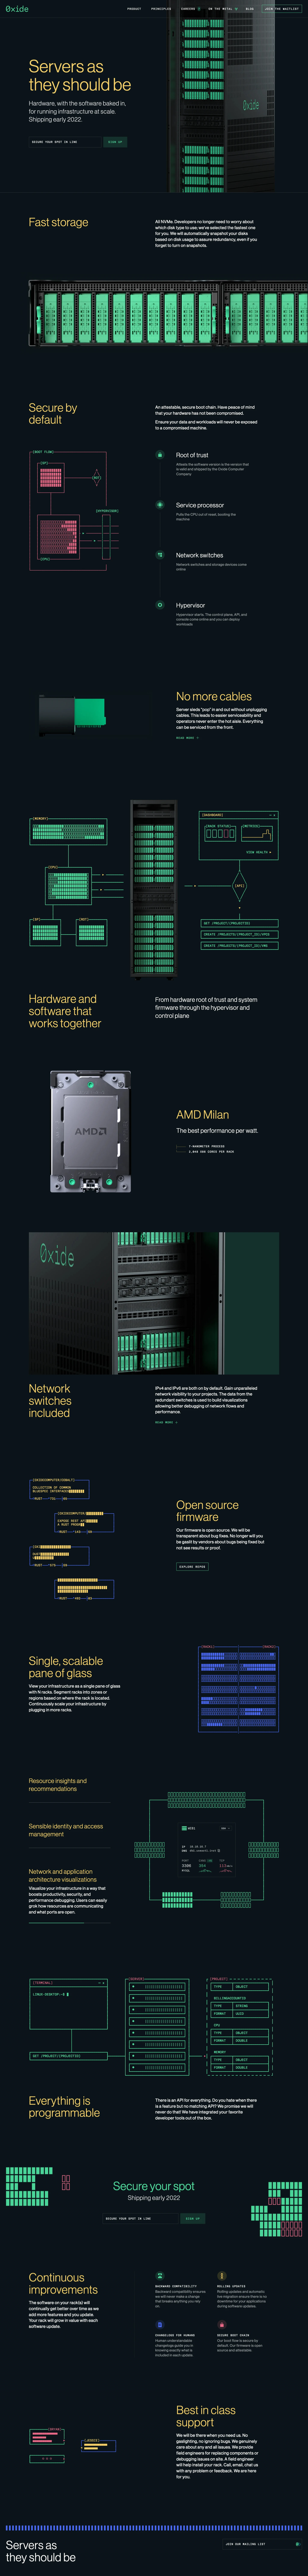 Oxide Landing Page Example: Servers as they should be. Hardware, with the software baked in, for running infrastructure at scale. Shipping early 2022.